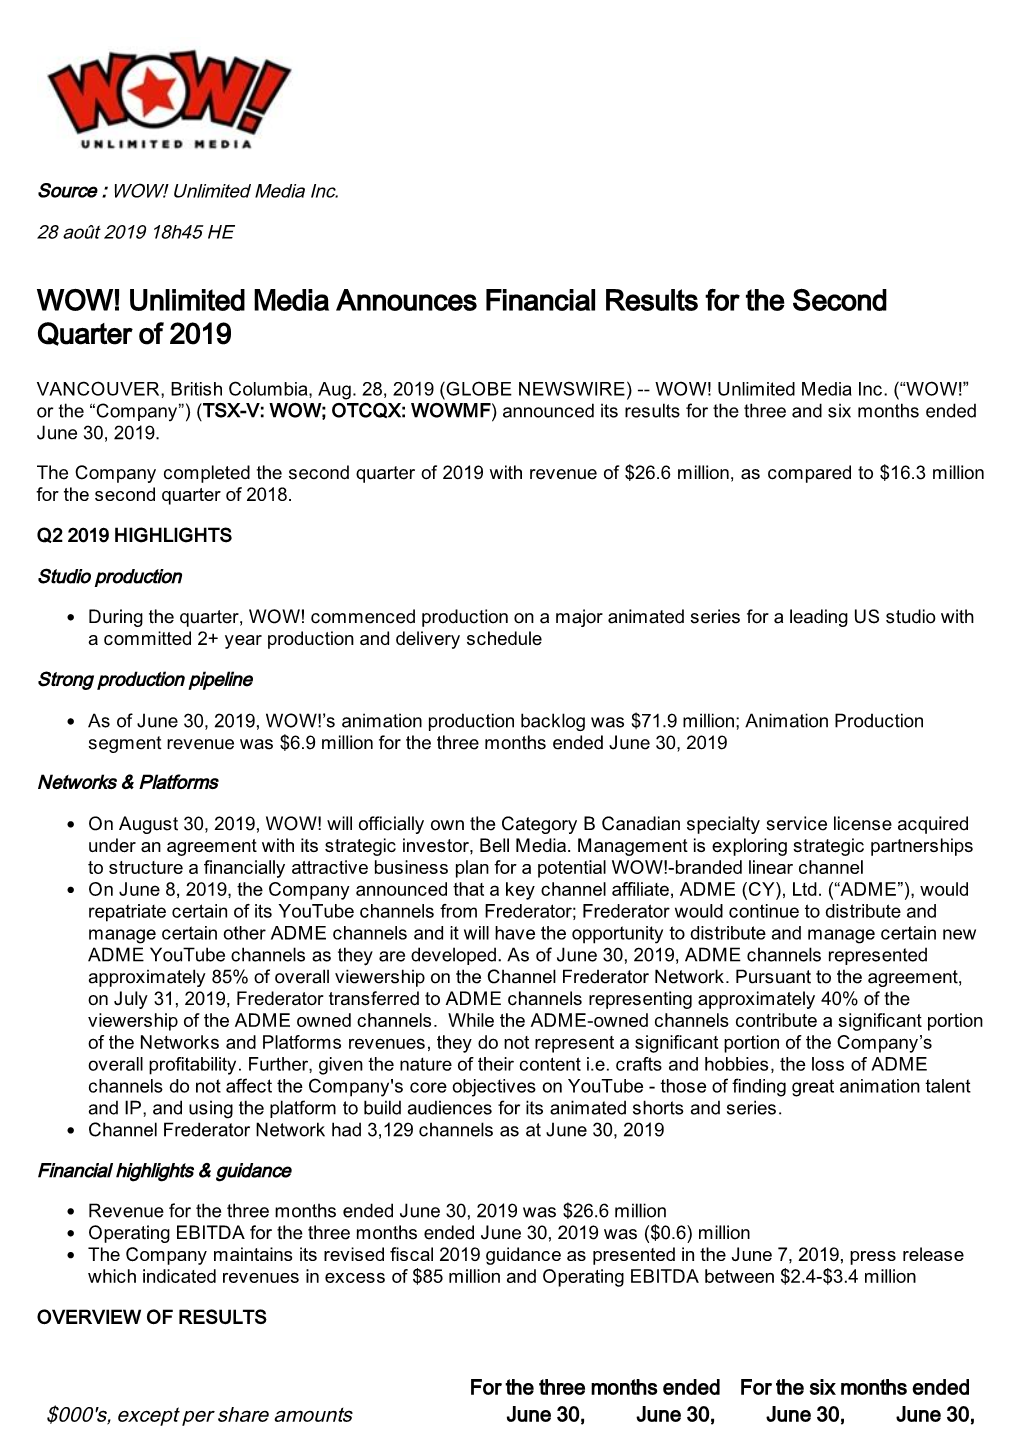 WOW! Unlimited Media Announces Financial Results for the Second Quarter of 2019